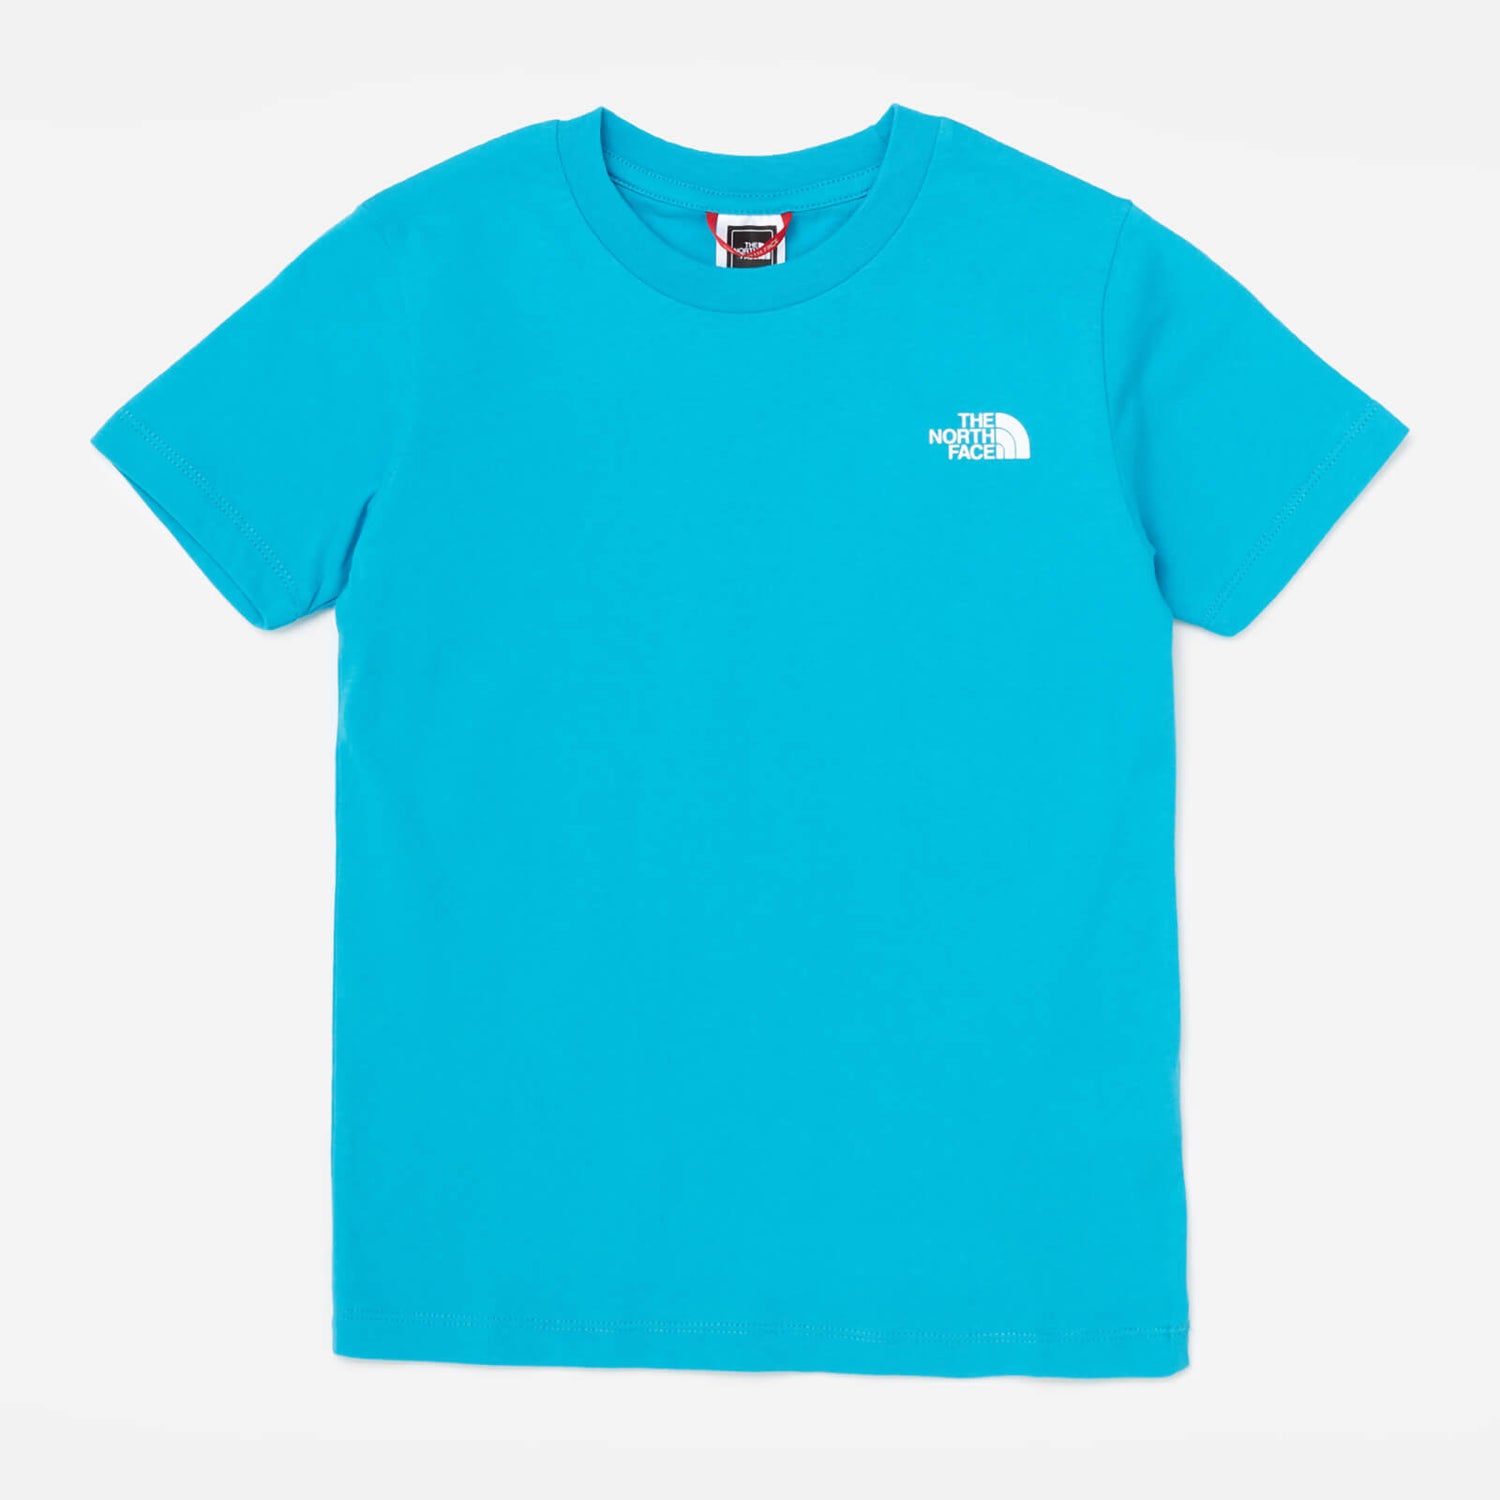 The North Face Boys' Youth Short Sleeve Simple Dome T-Shirt - Blue